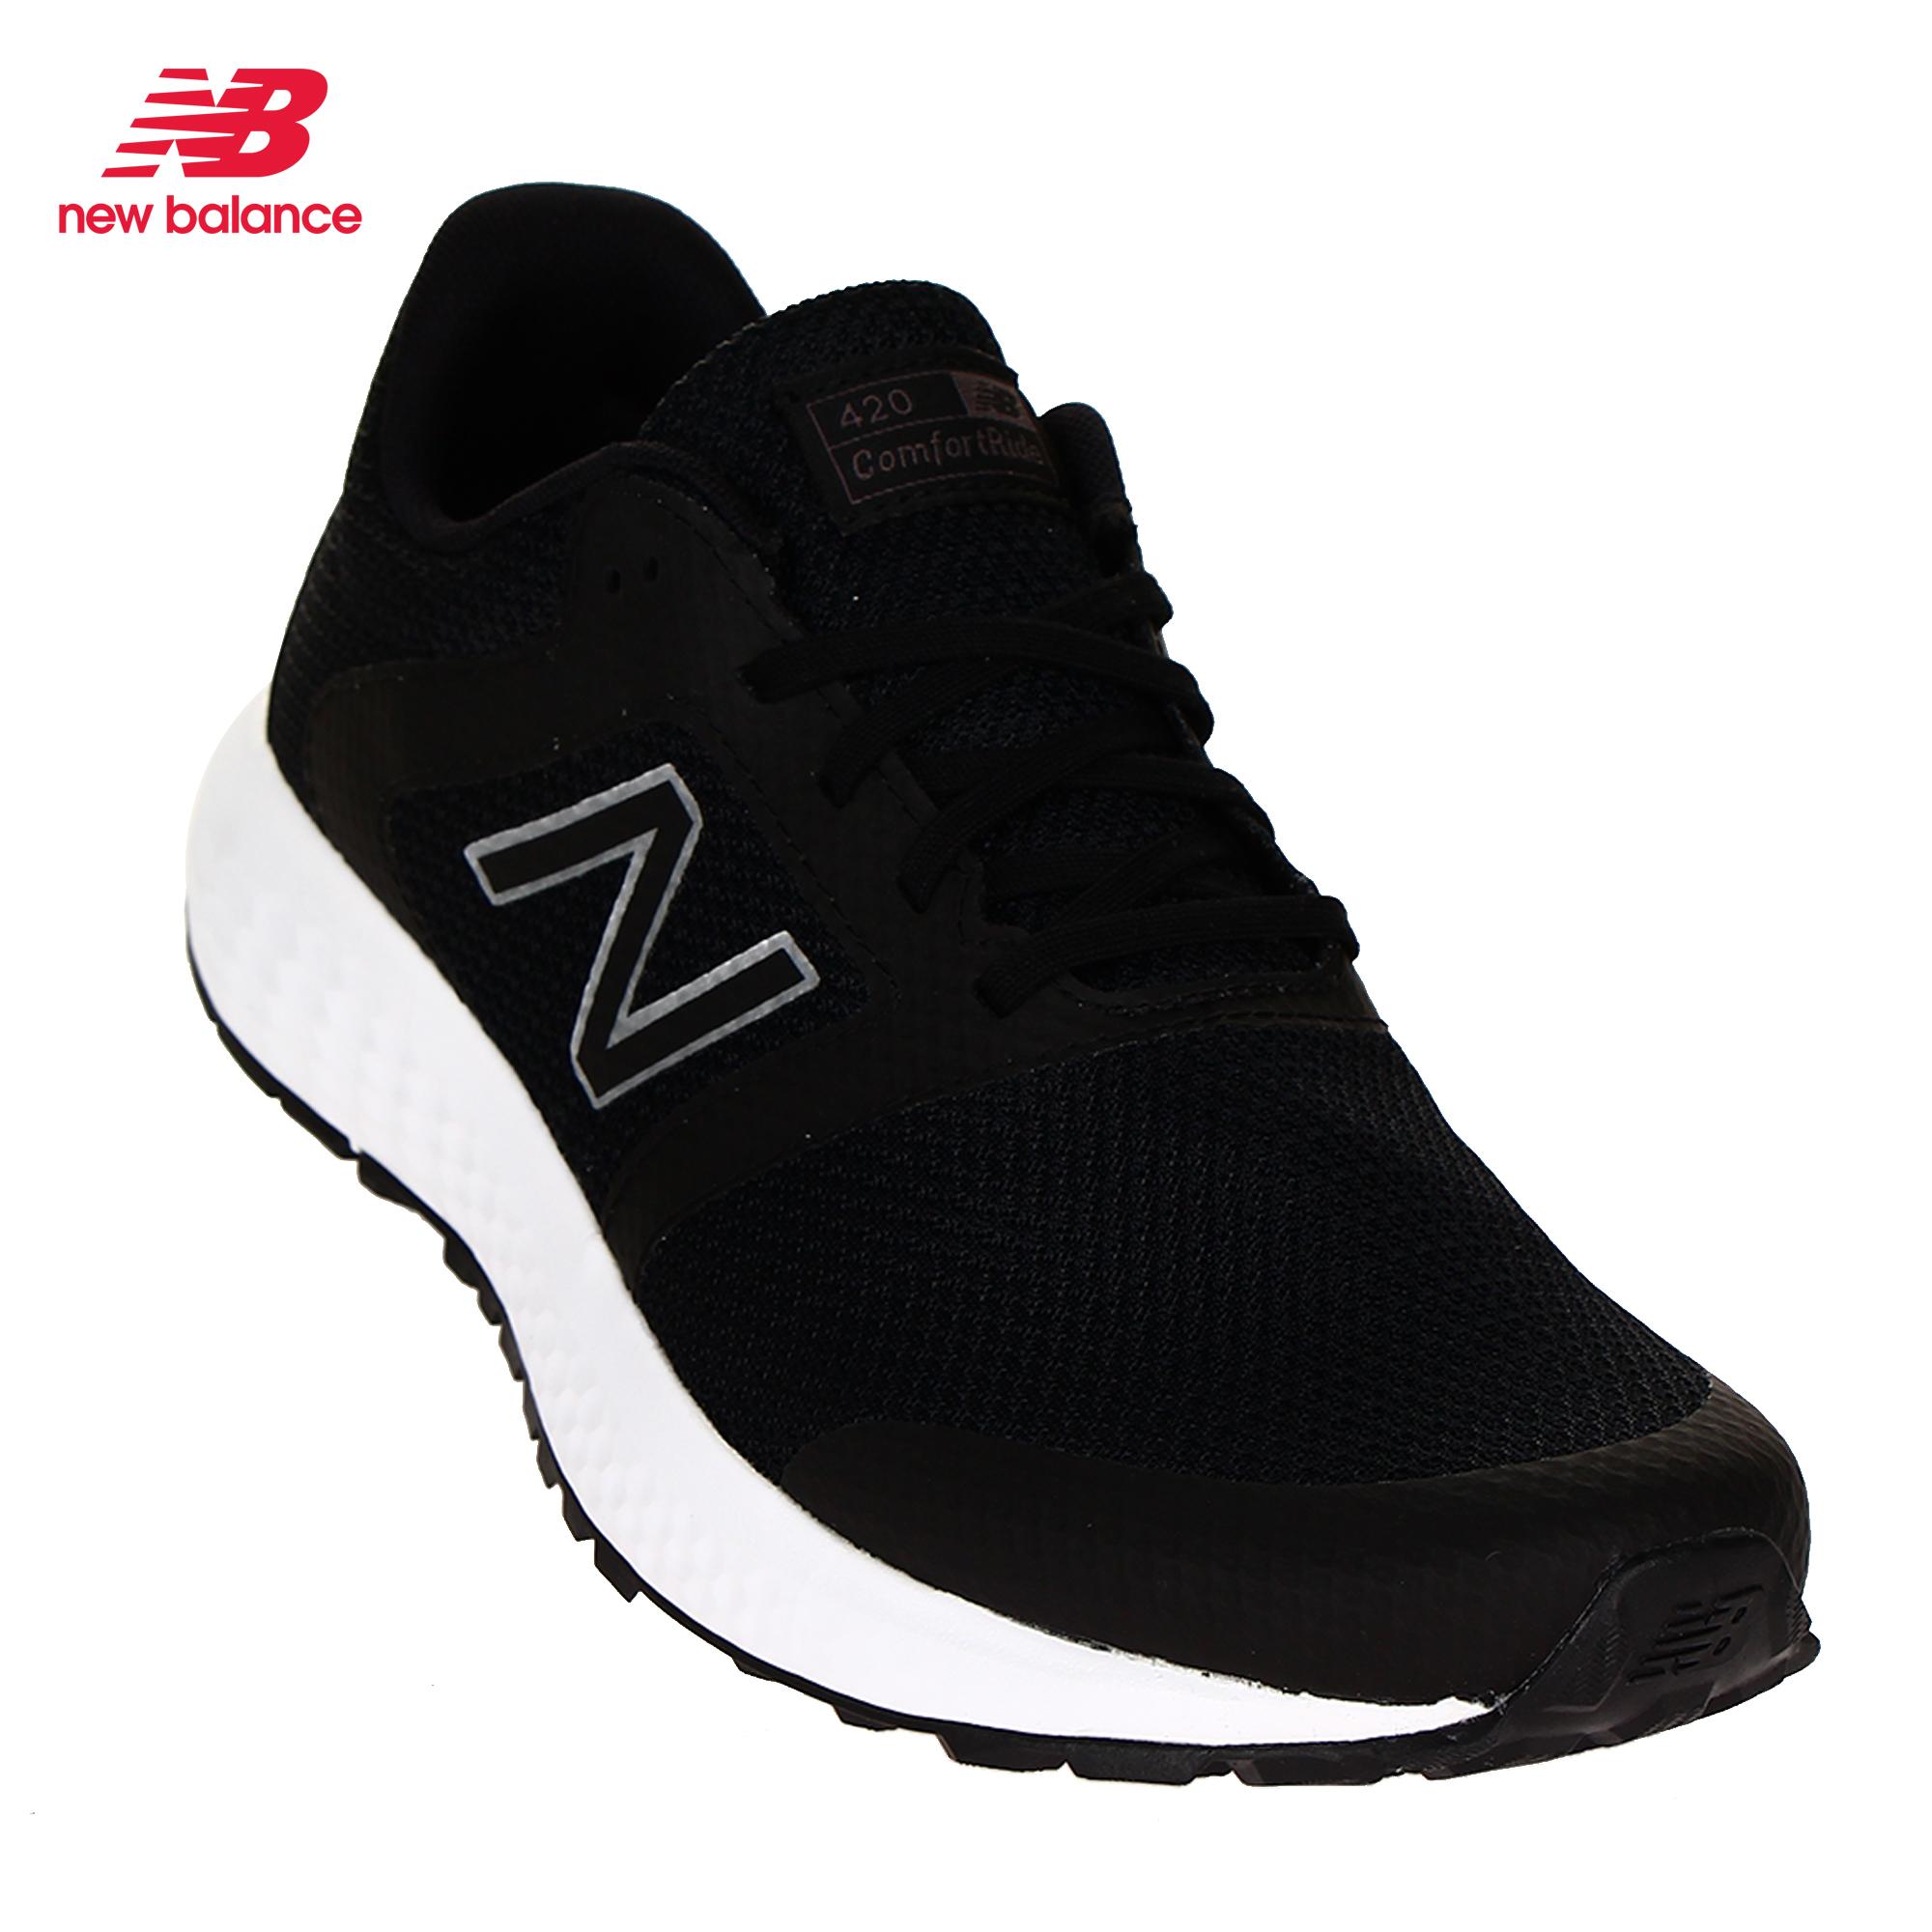 new balance 420 running shoes off 63 